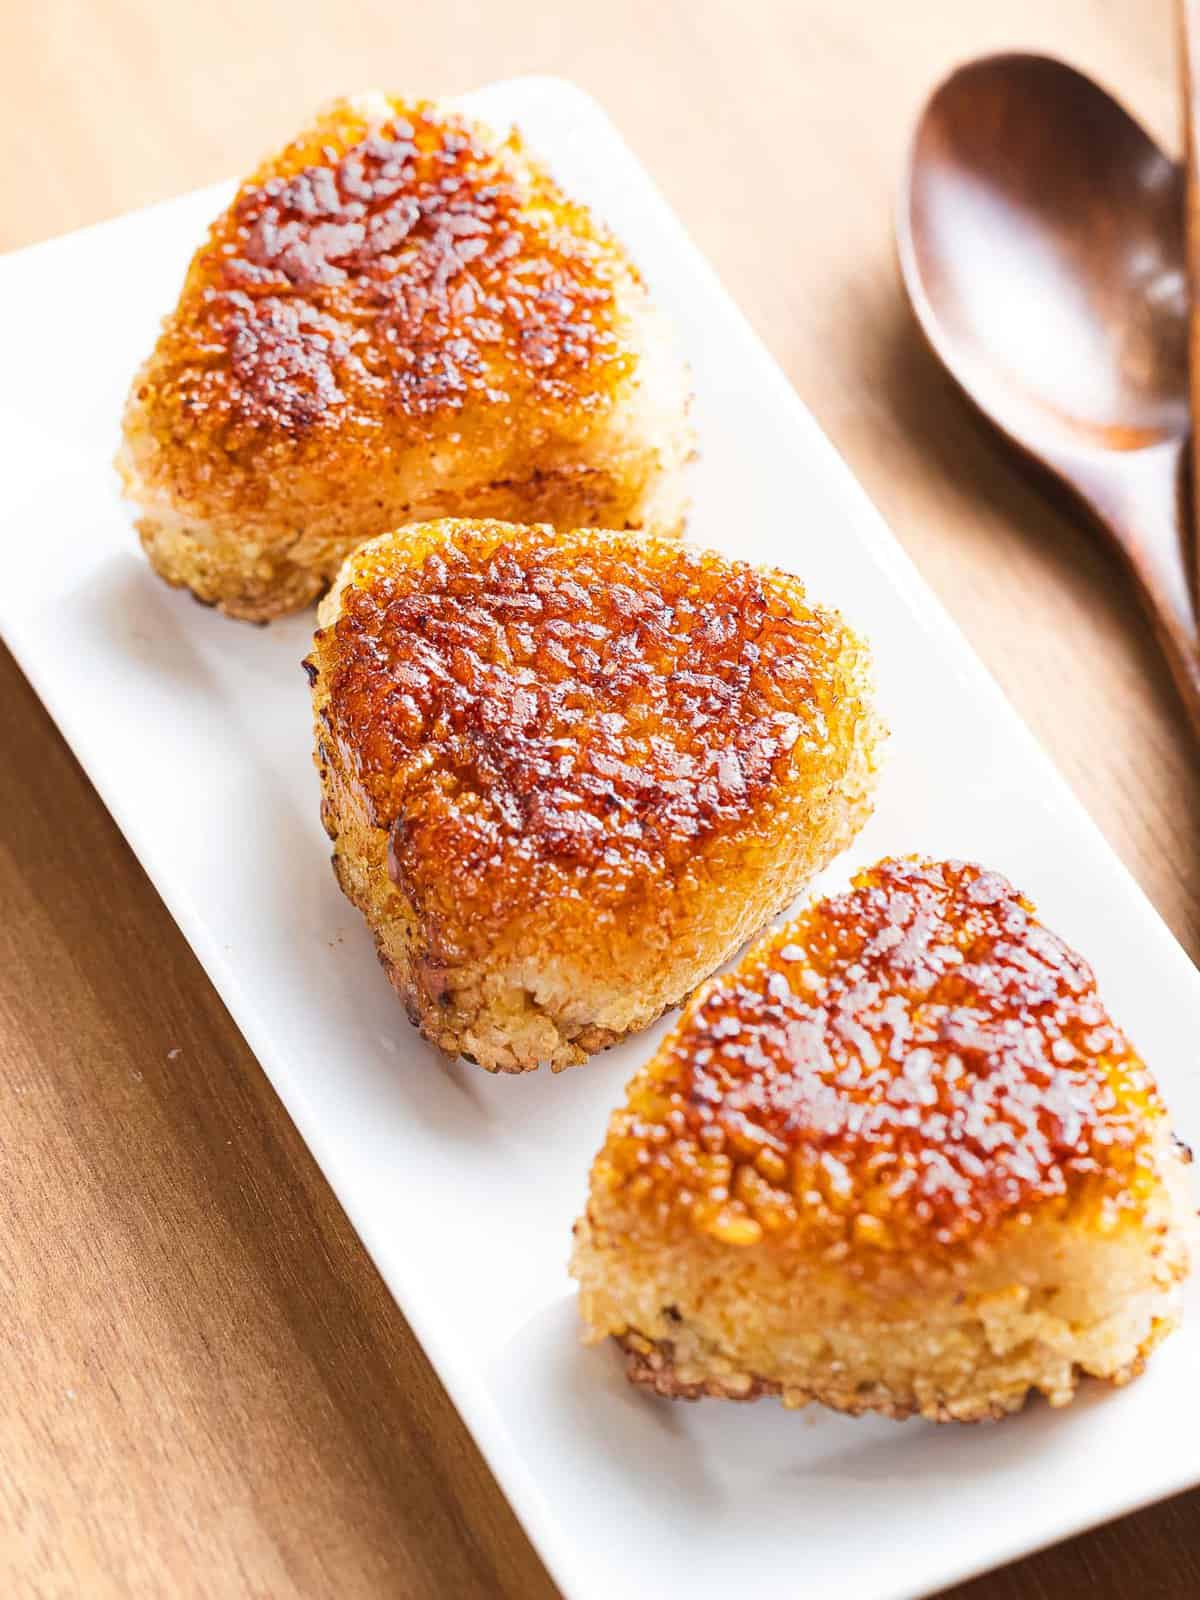 Yaki onigiri or grilled rice balls with soy sauce.